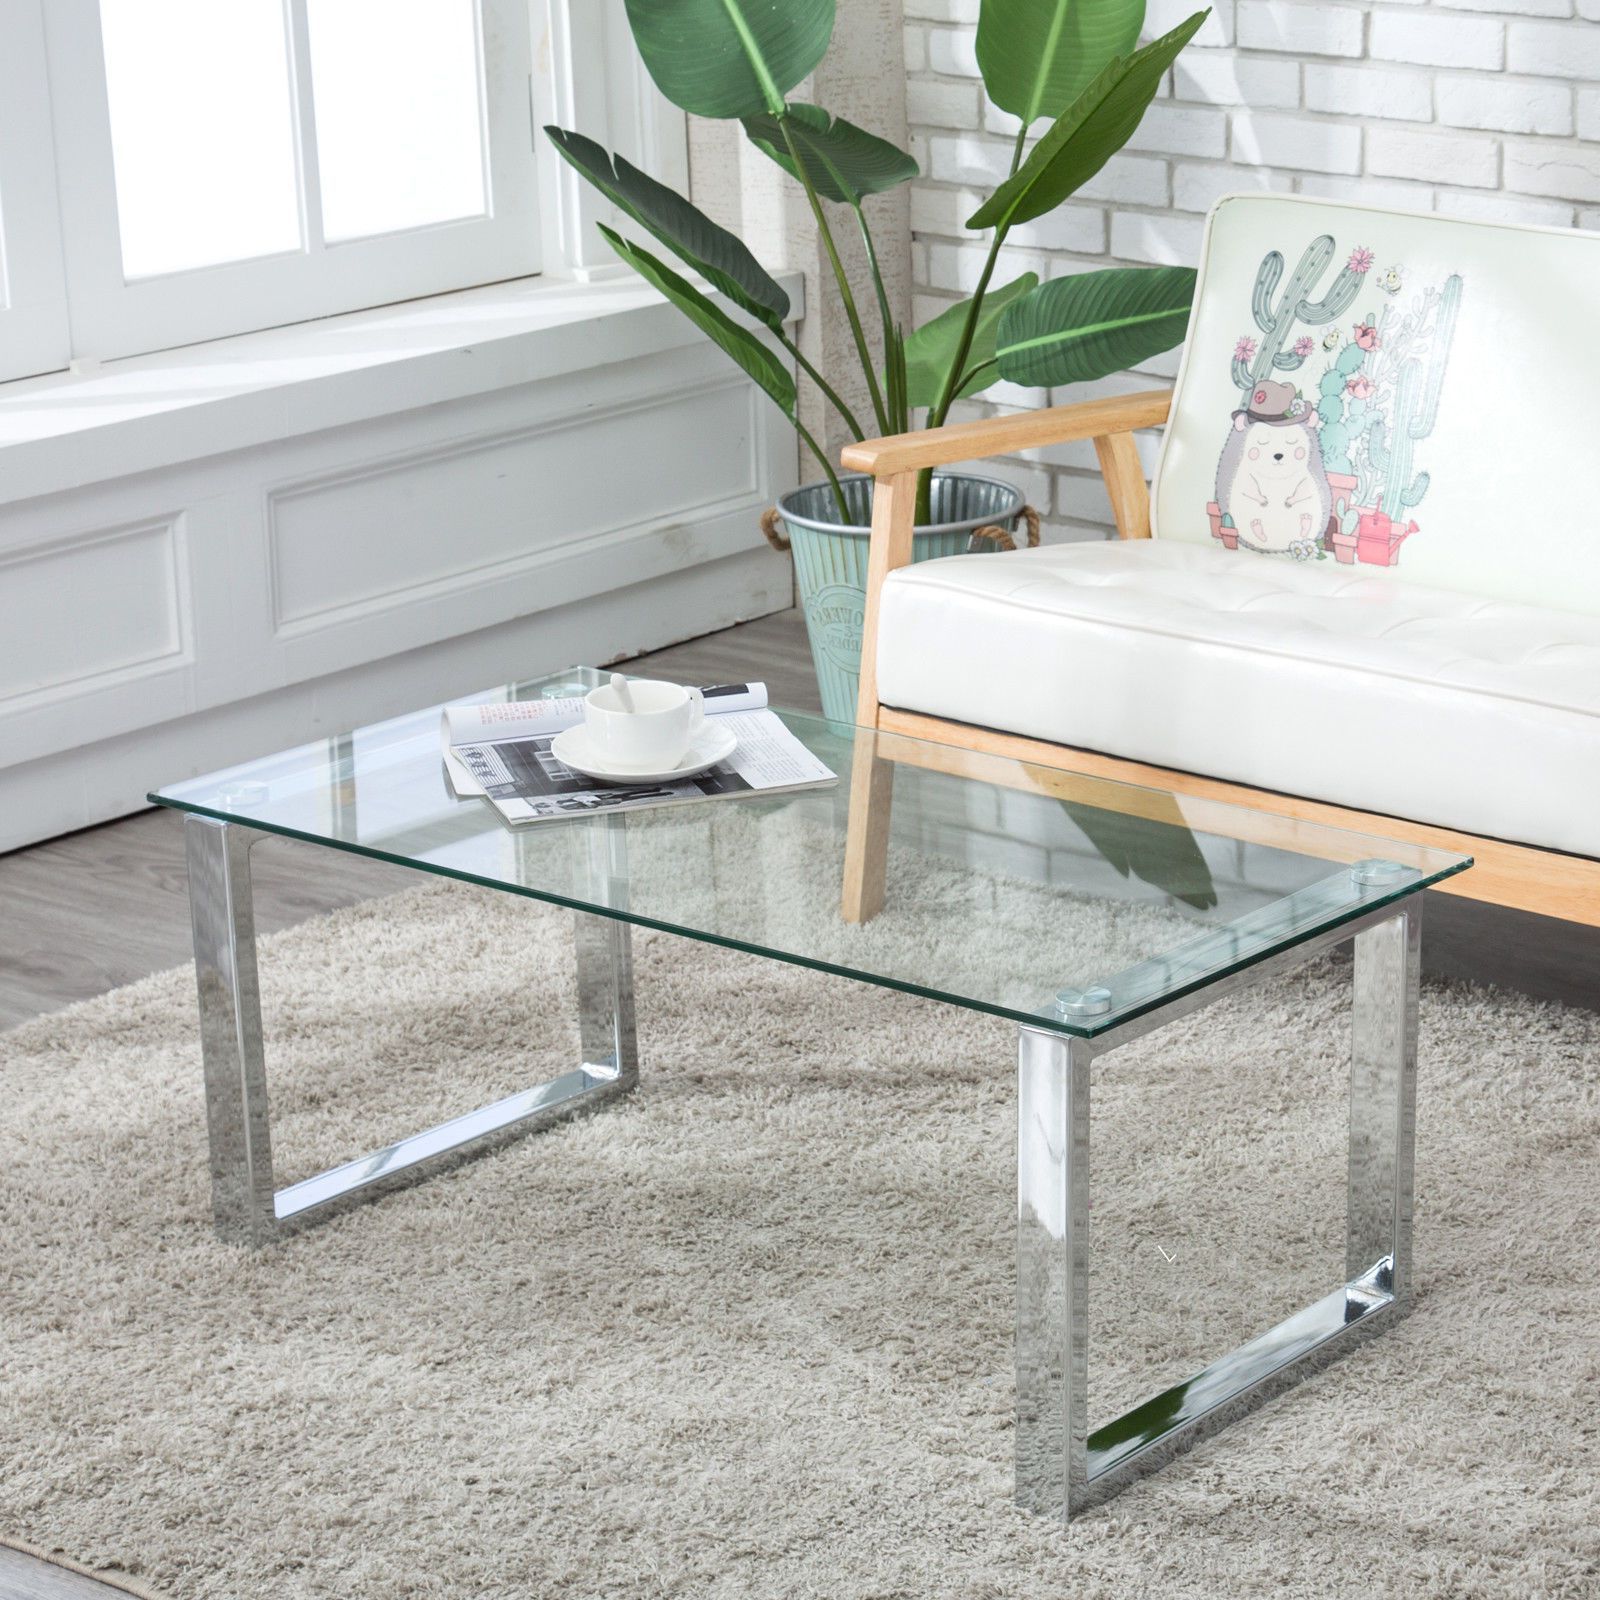 Rectangular Glass Coffee Table Side End Stainless Steel Intended For Preferred Silver Stainless Steel Coffee Tables (Gallery 2 of 20)